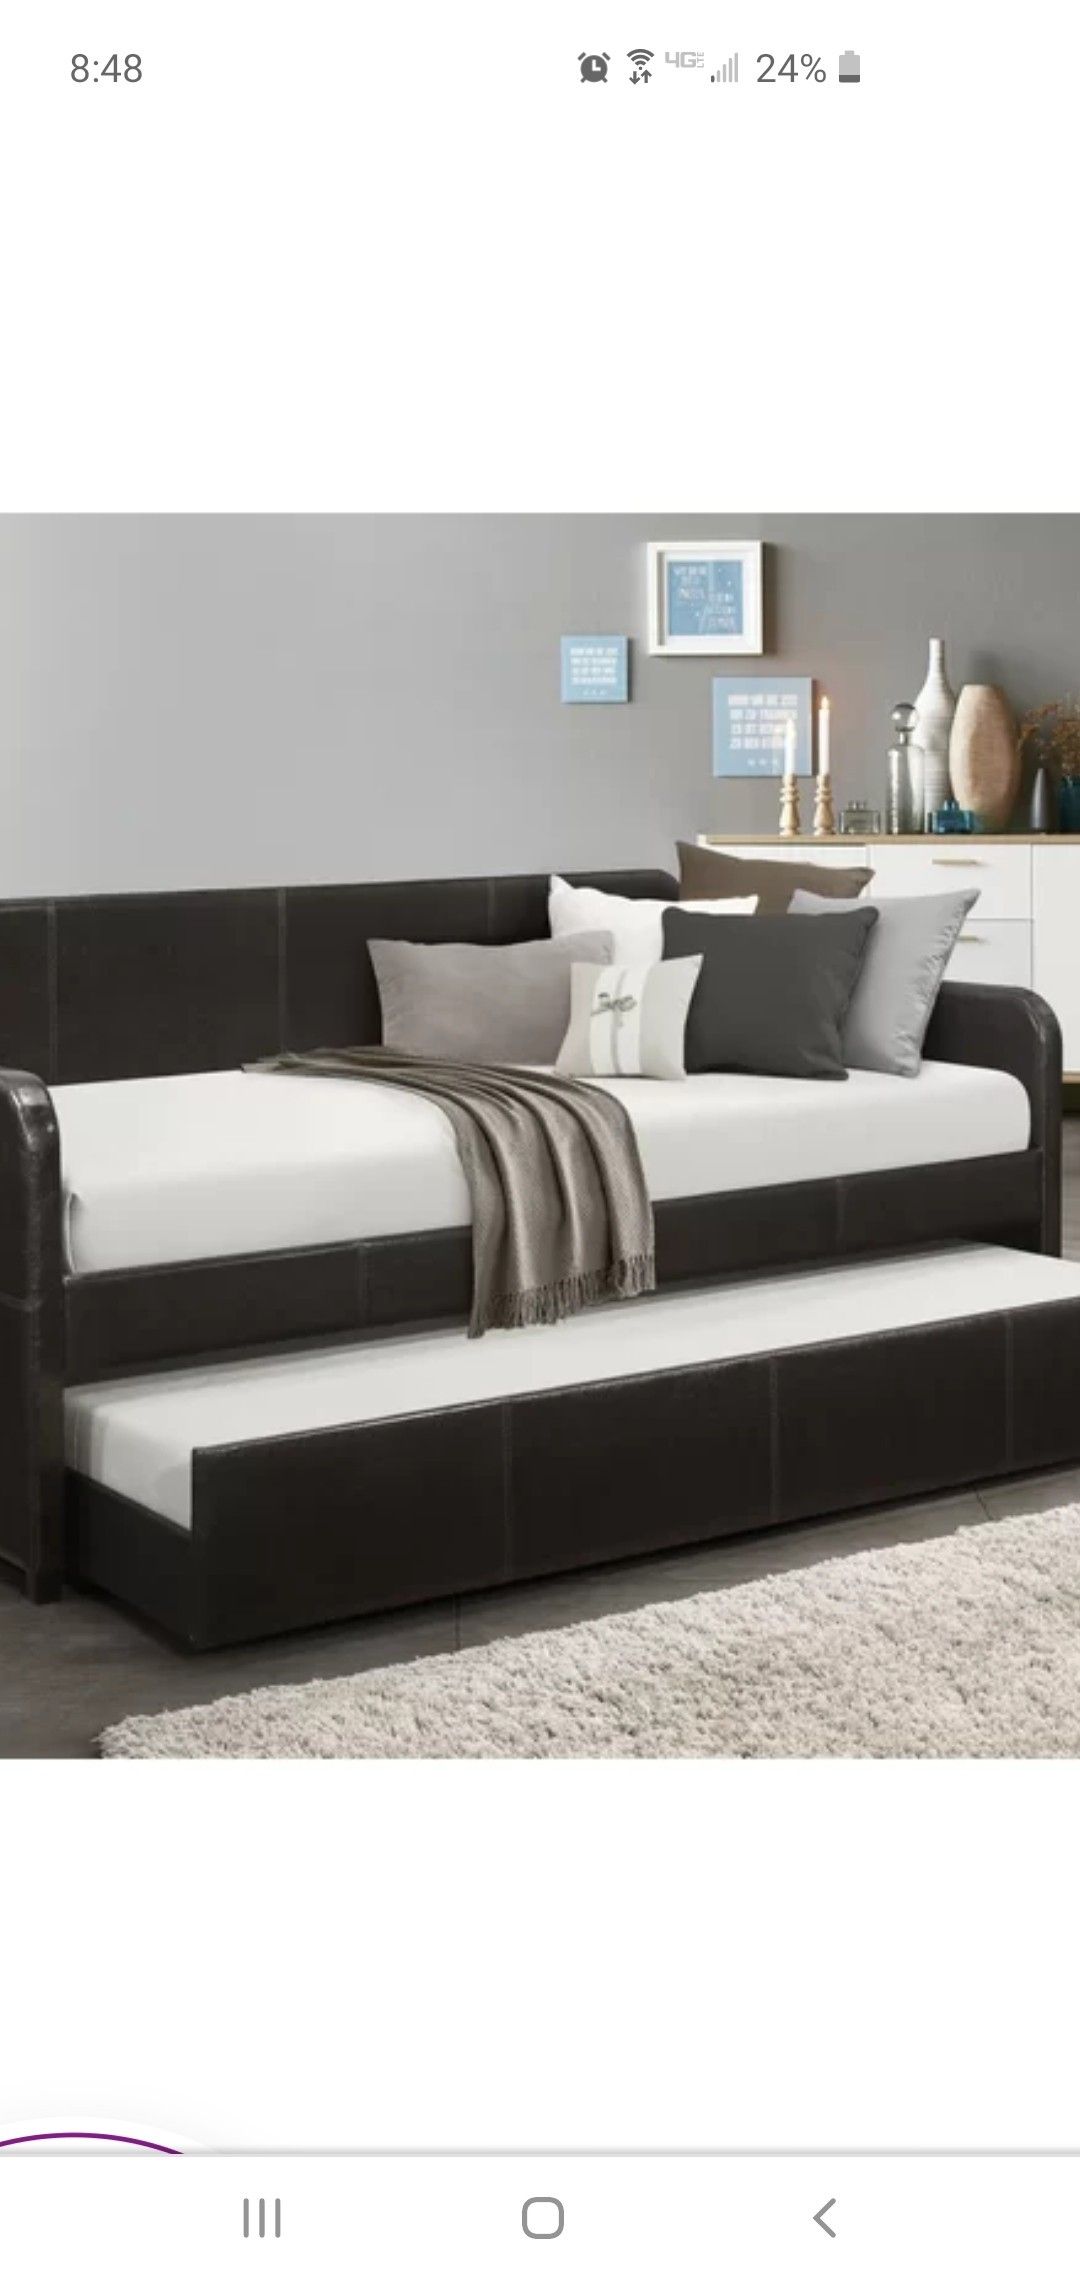 Bed frame with hideaway